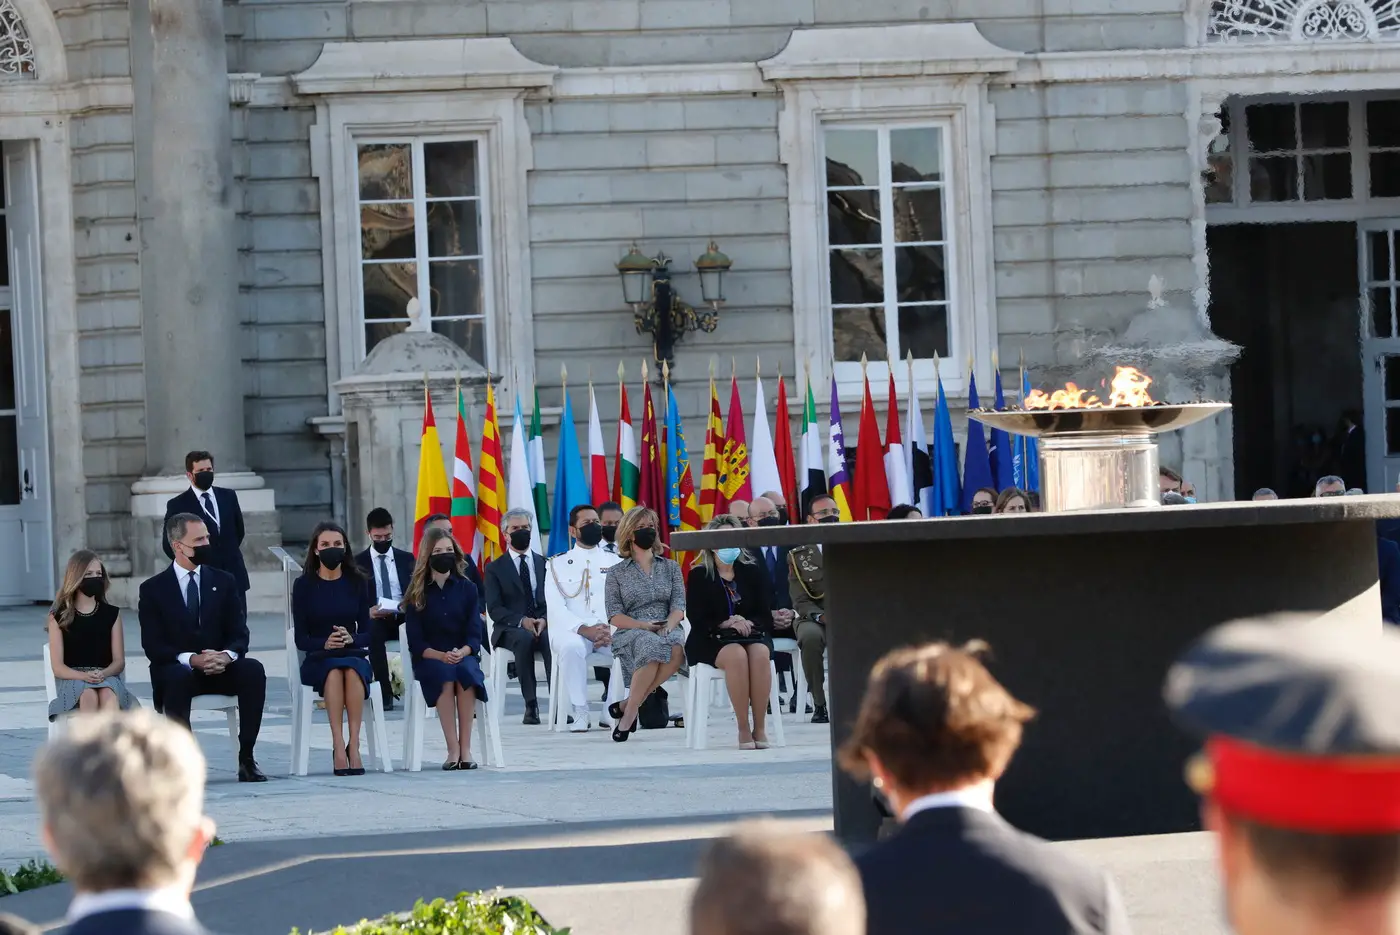 King Felipe and Queen Letizia of Spain presided over the Solemn act of tribute to the victims of Covid-19 and recognition of society